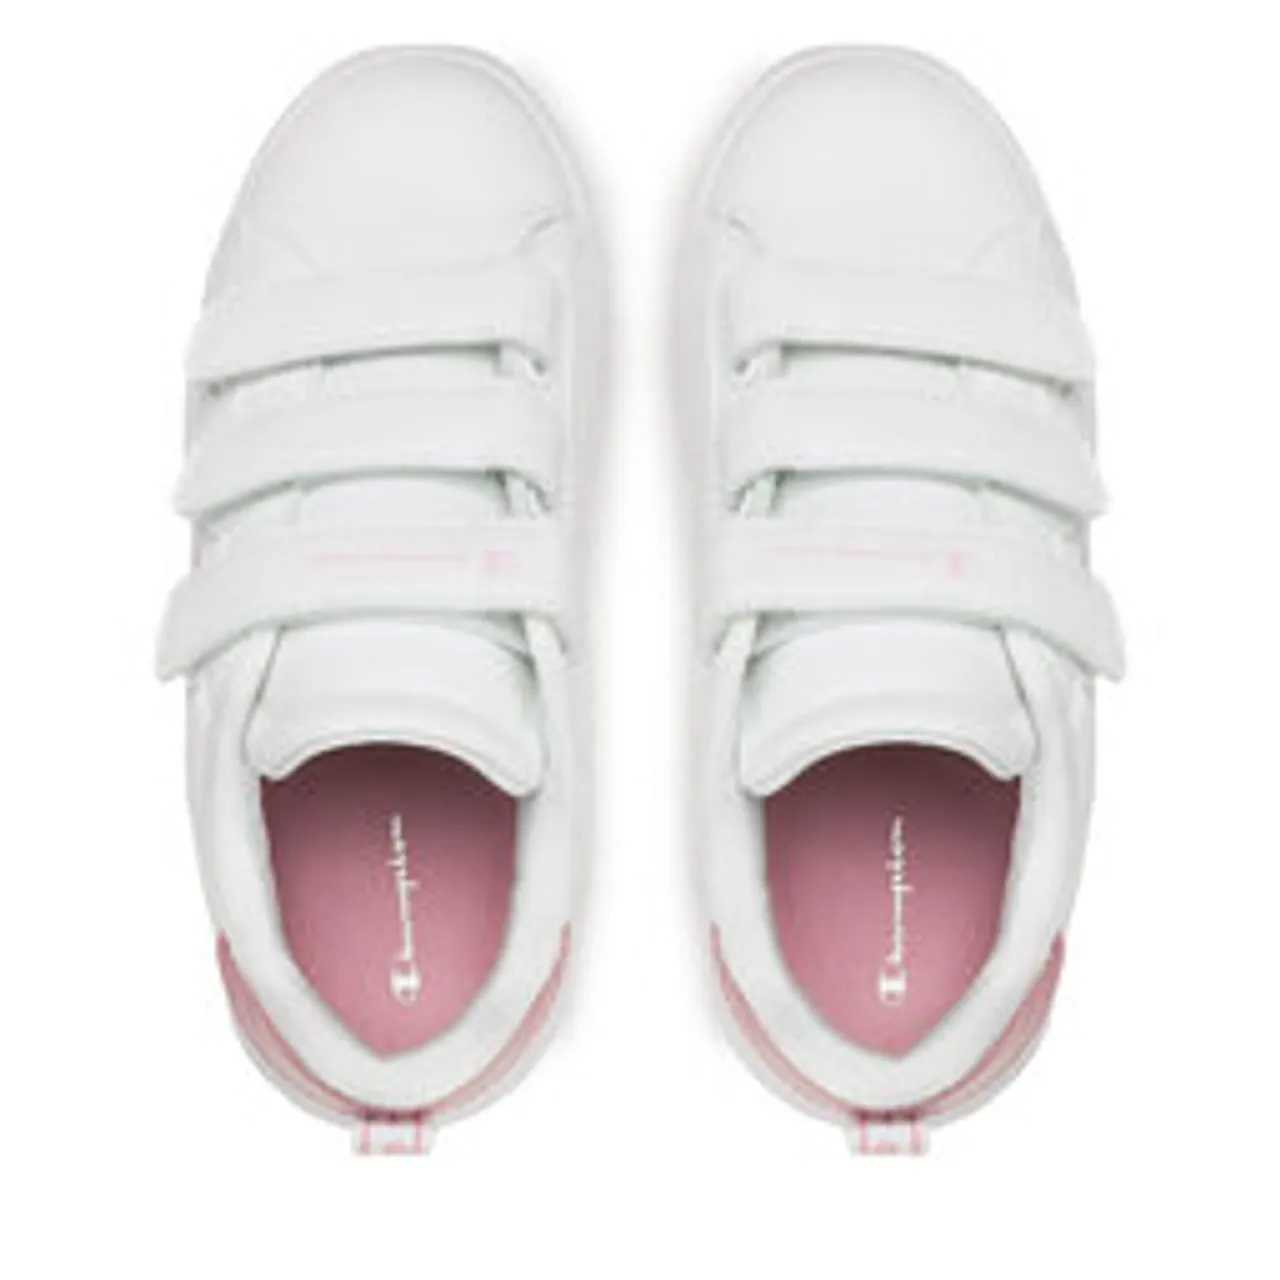 Sneakers Champion Angel G Ps S32514-WW010 Wht/Rose Gold